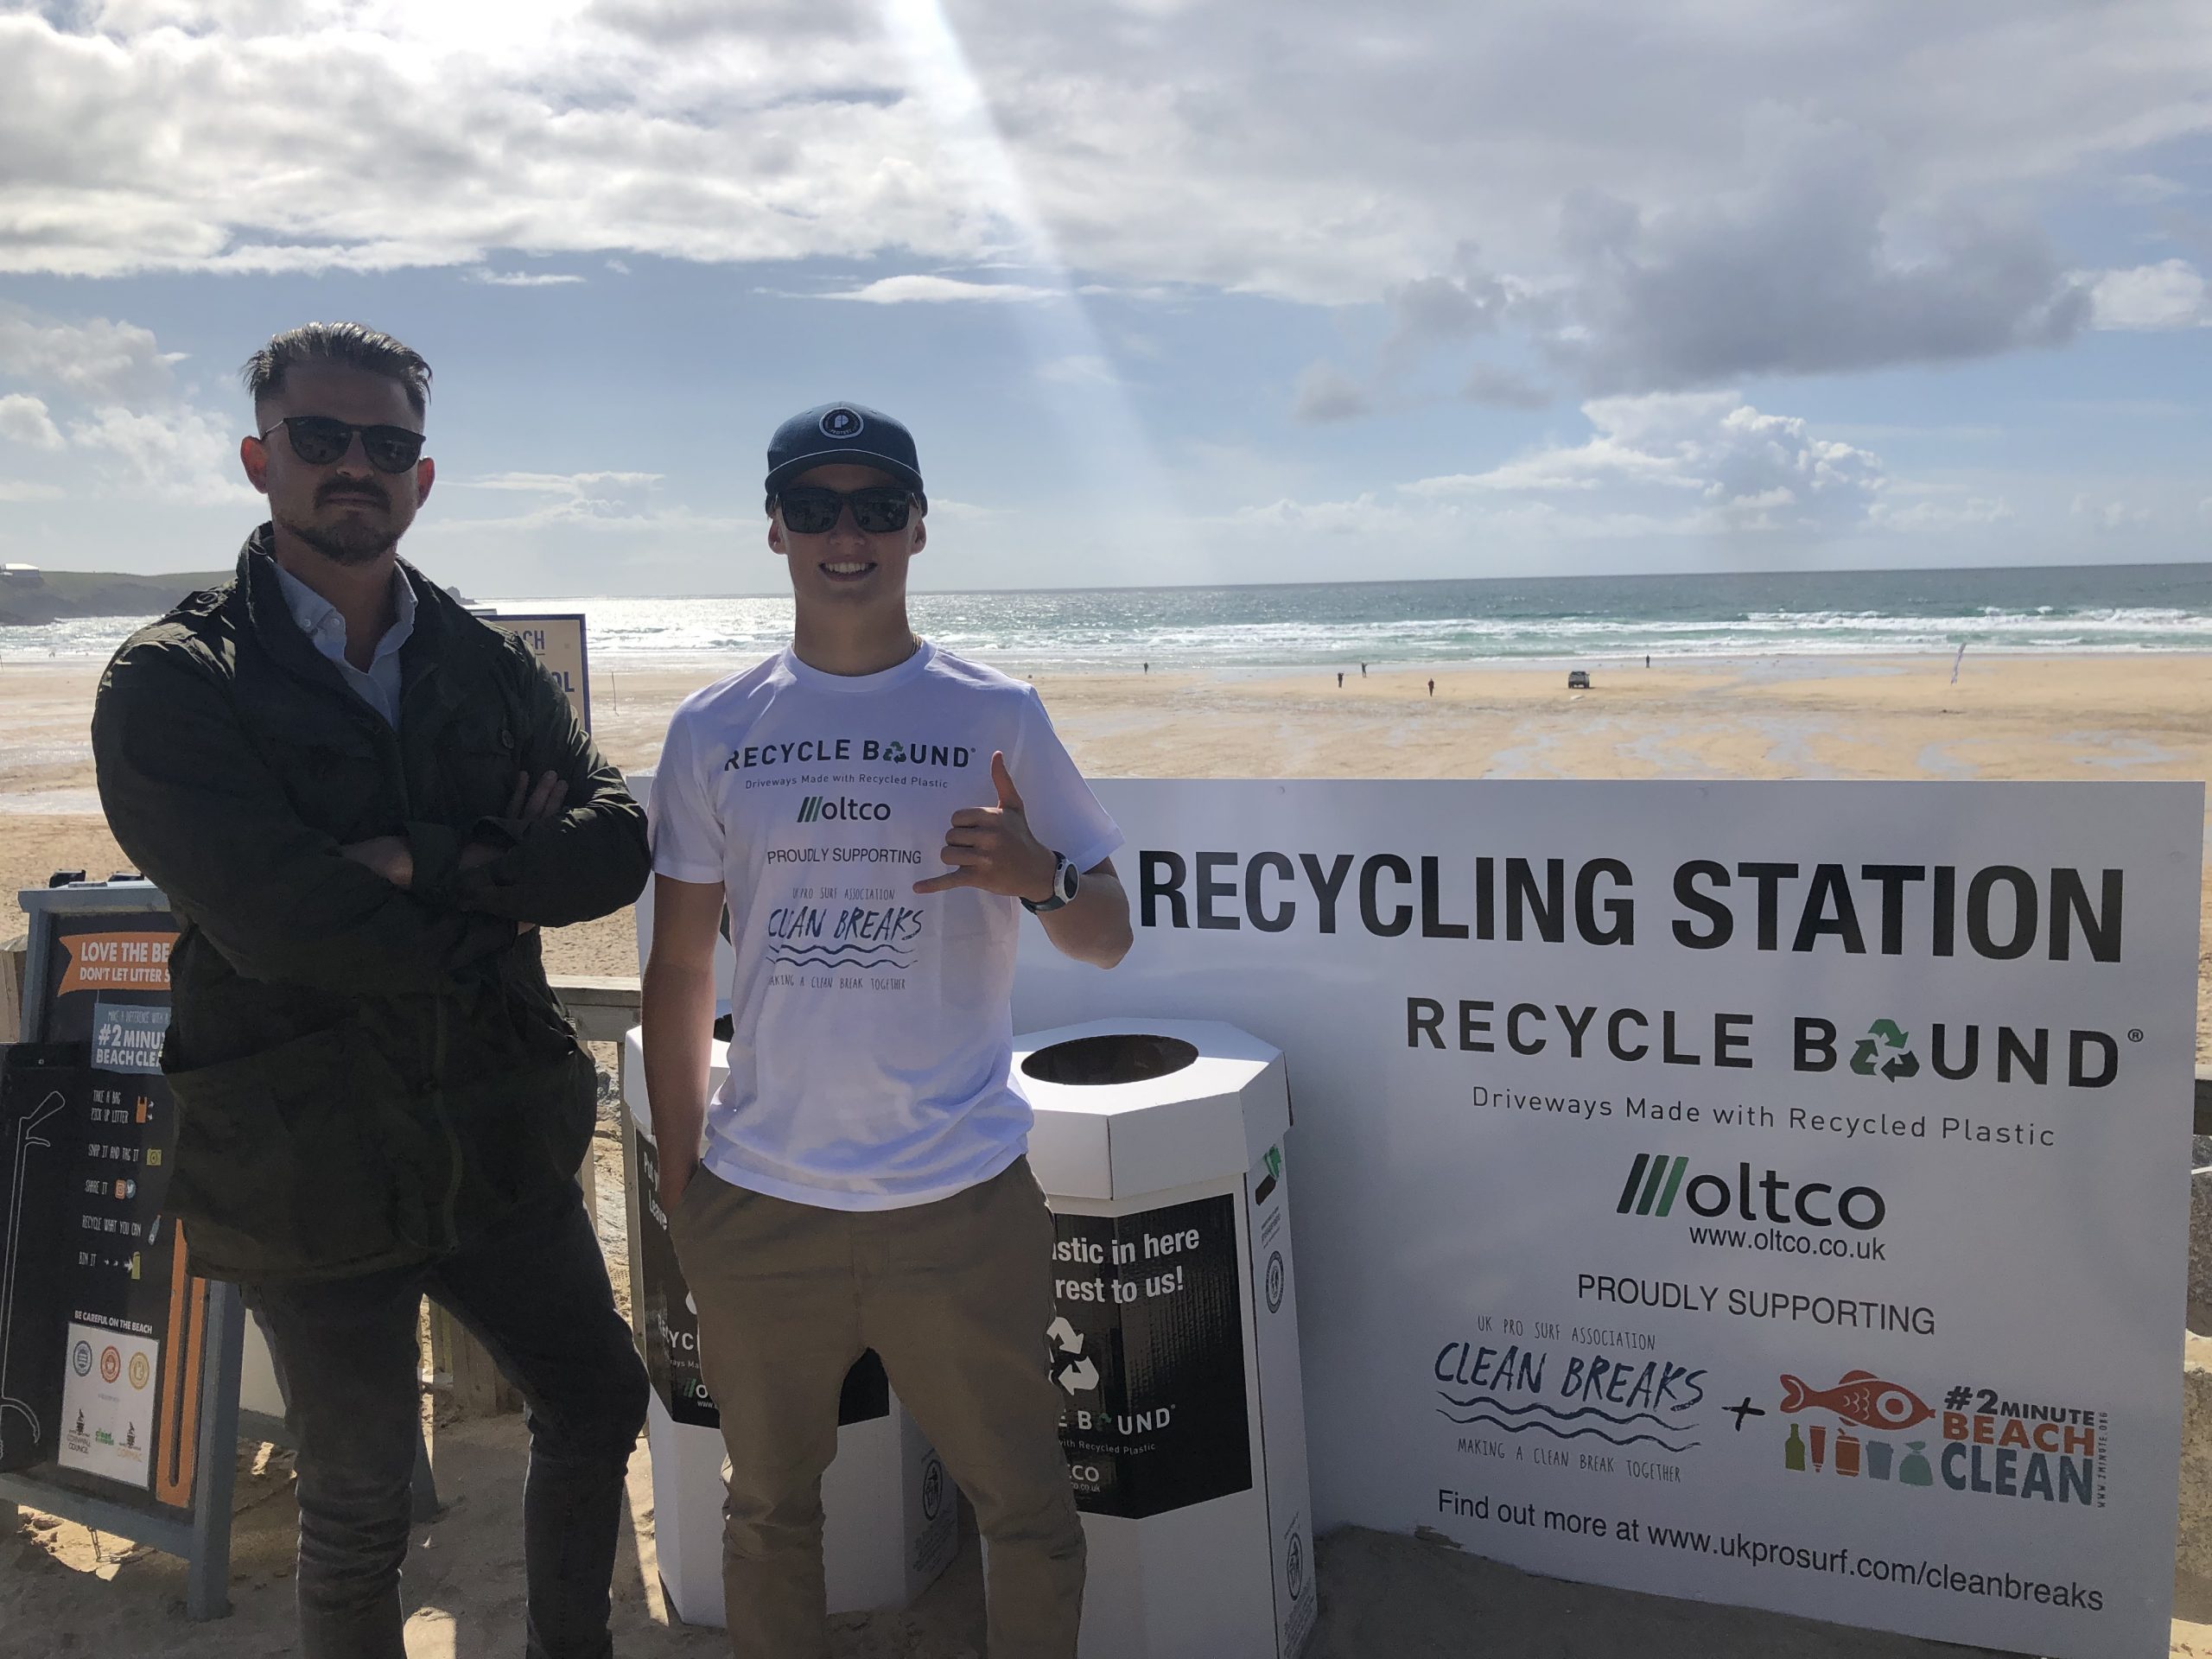 Johnny Pearce and Noah Capps, Recycle Bound Surf Ambassador